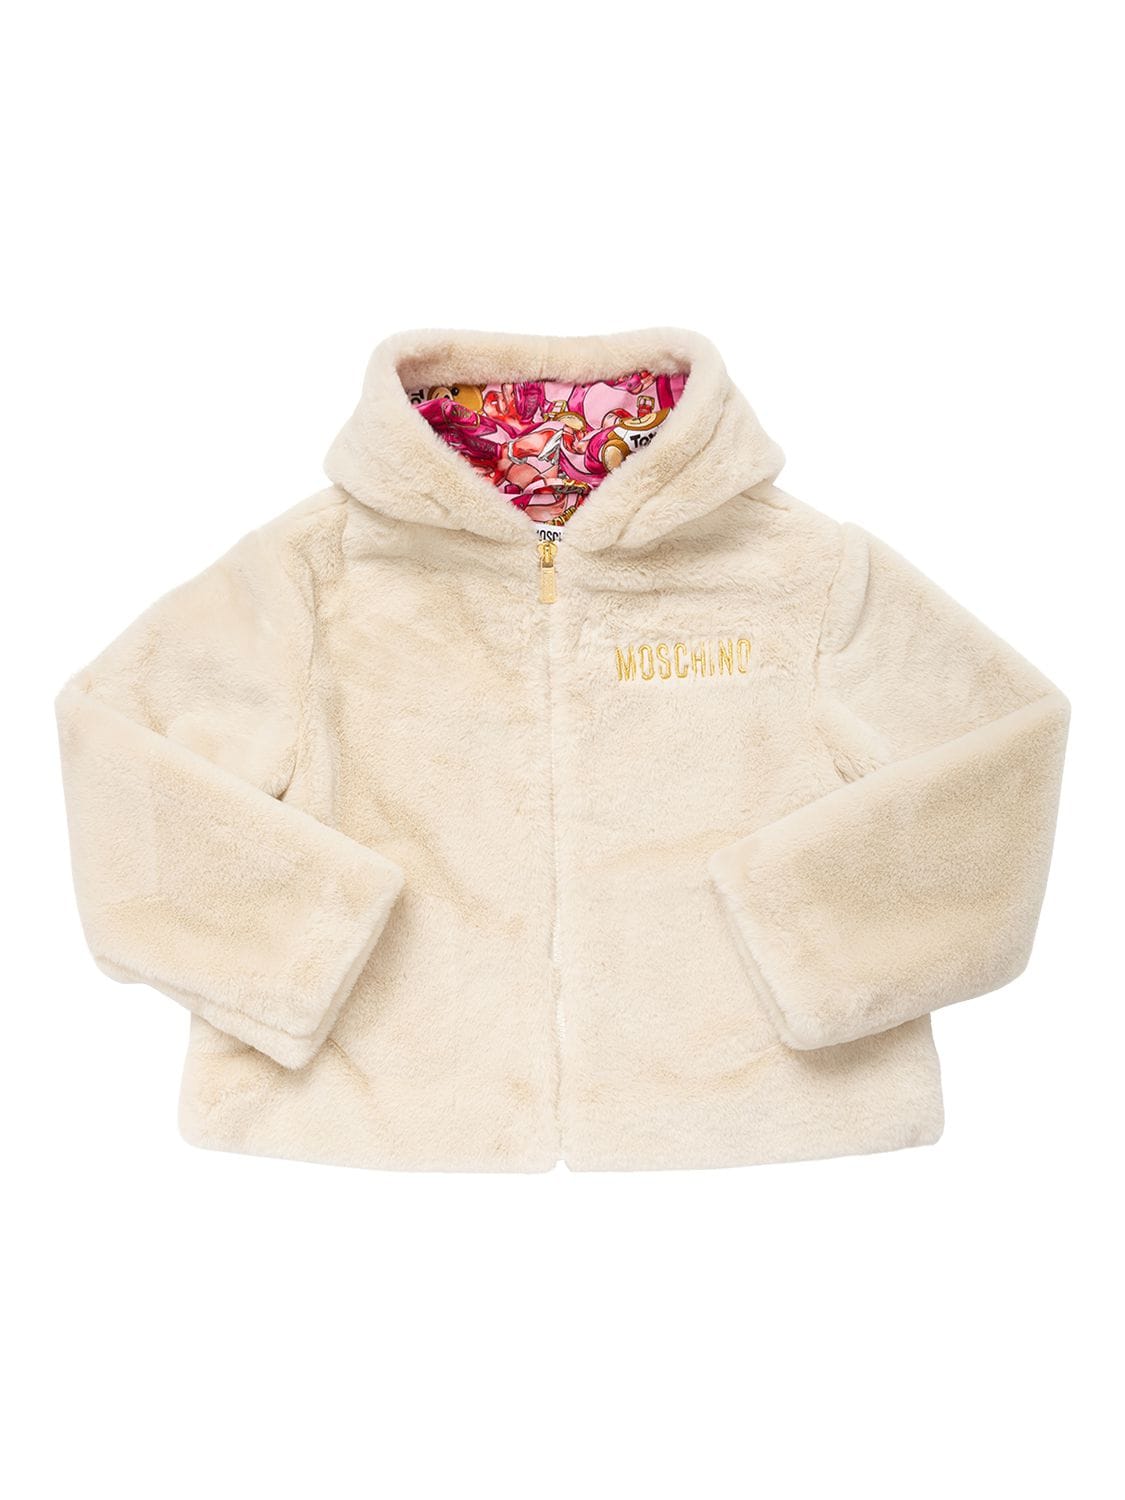 Moschino Kids' Faux Fur Jacket In White